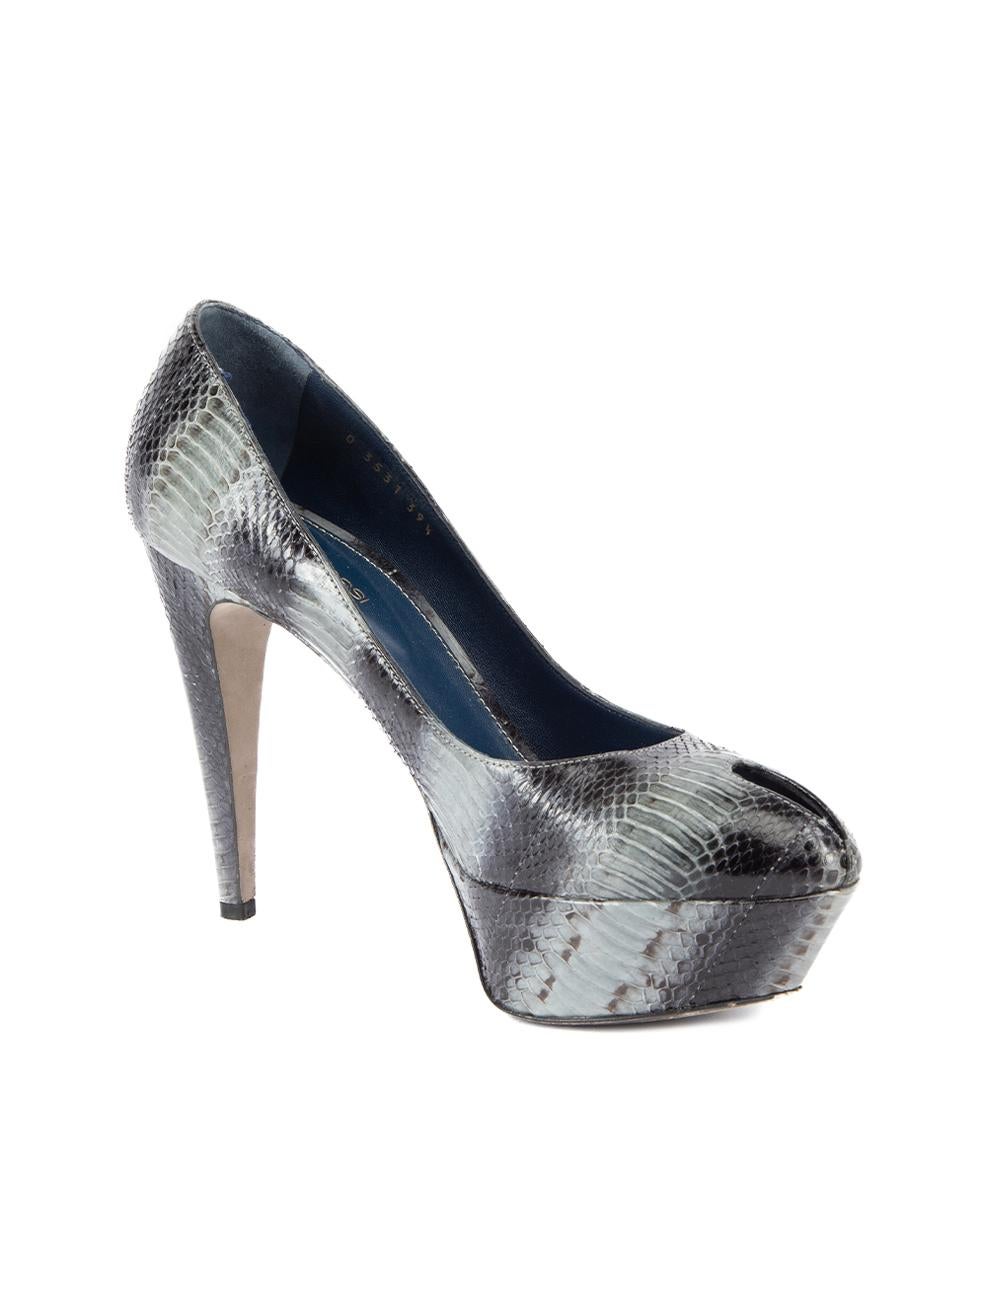 CONDITION is Very good. Minimal wear to heels is evident. Minimal wear to snakeskin exterior and the outsole on this used Sergio Rossi designer resale item. Details Blue grey Snakeskin High heel Platform Peep toe Slip on Navy insole Leather insole